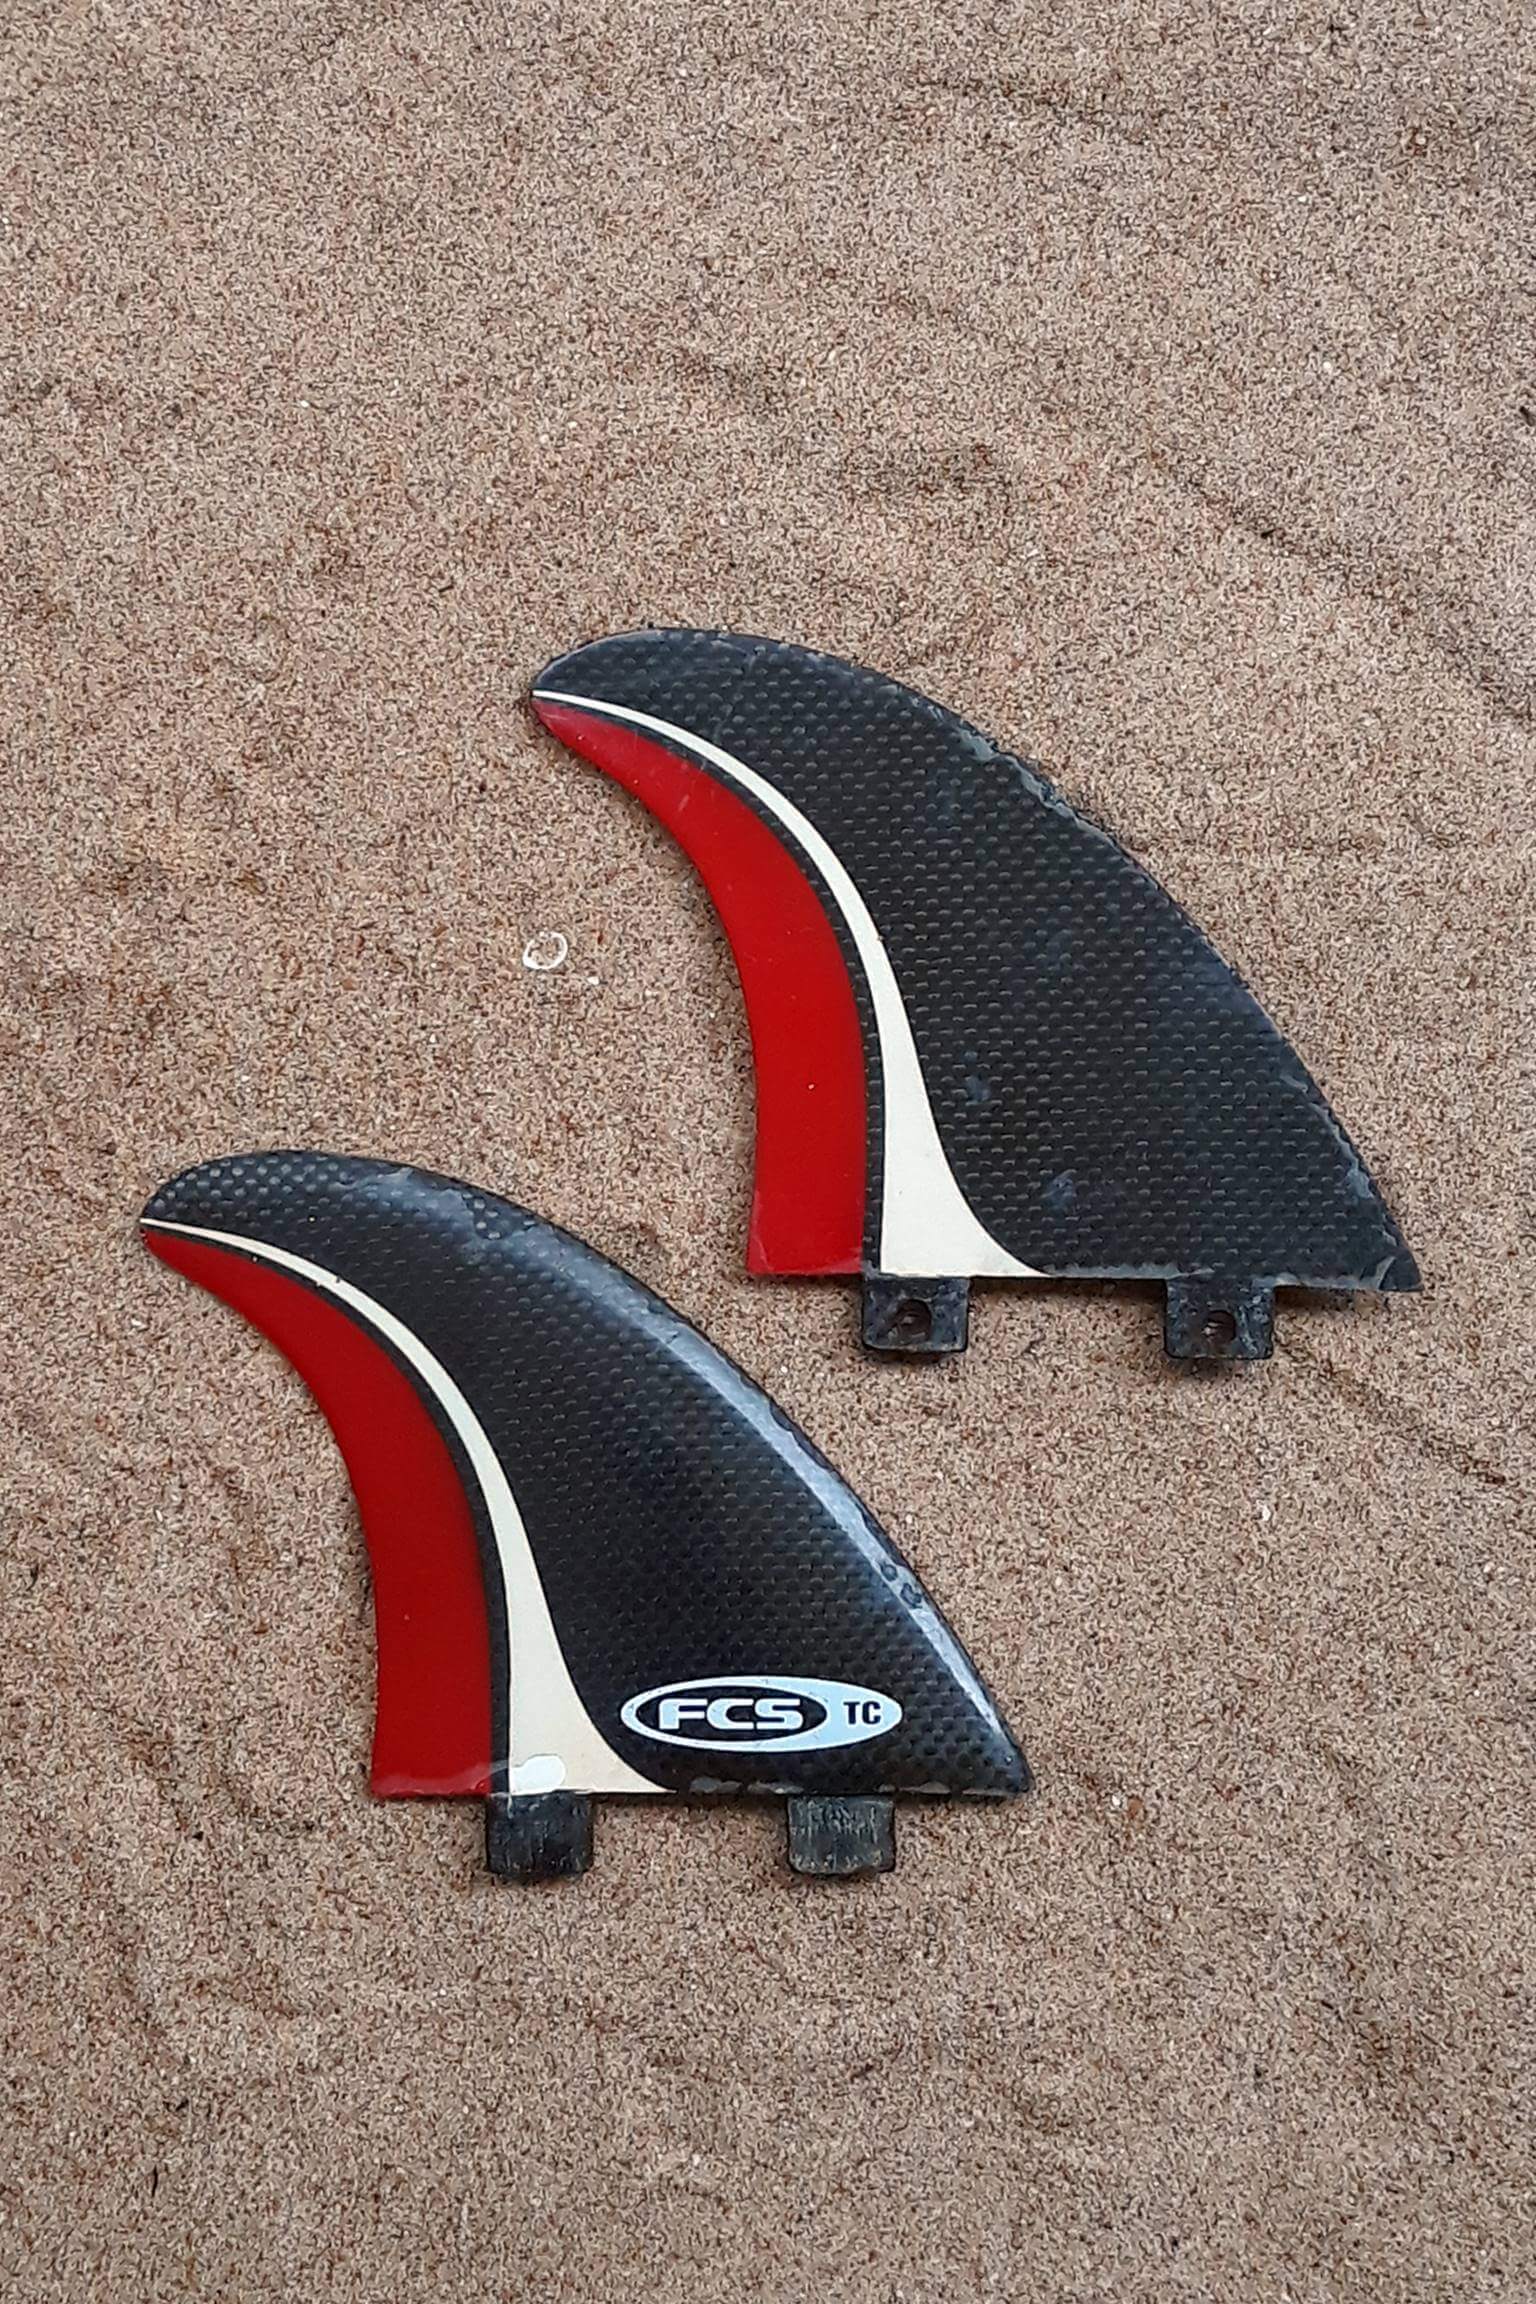 Z Sold – FINS – FCS I TC Whitelines  (L&R Only – Will Not Separate)